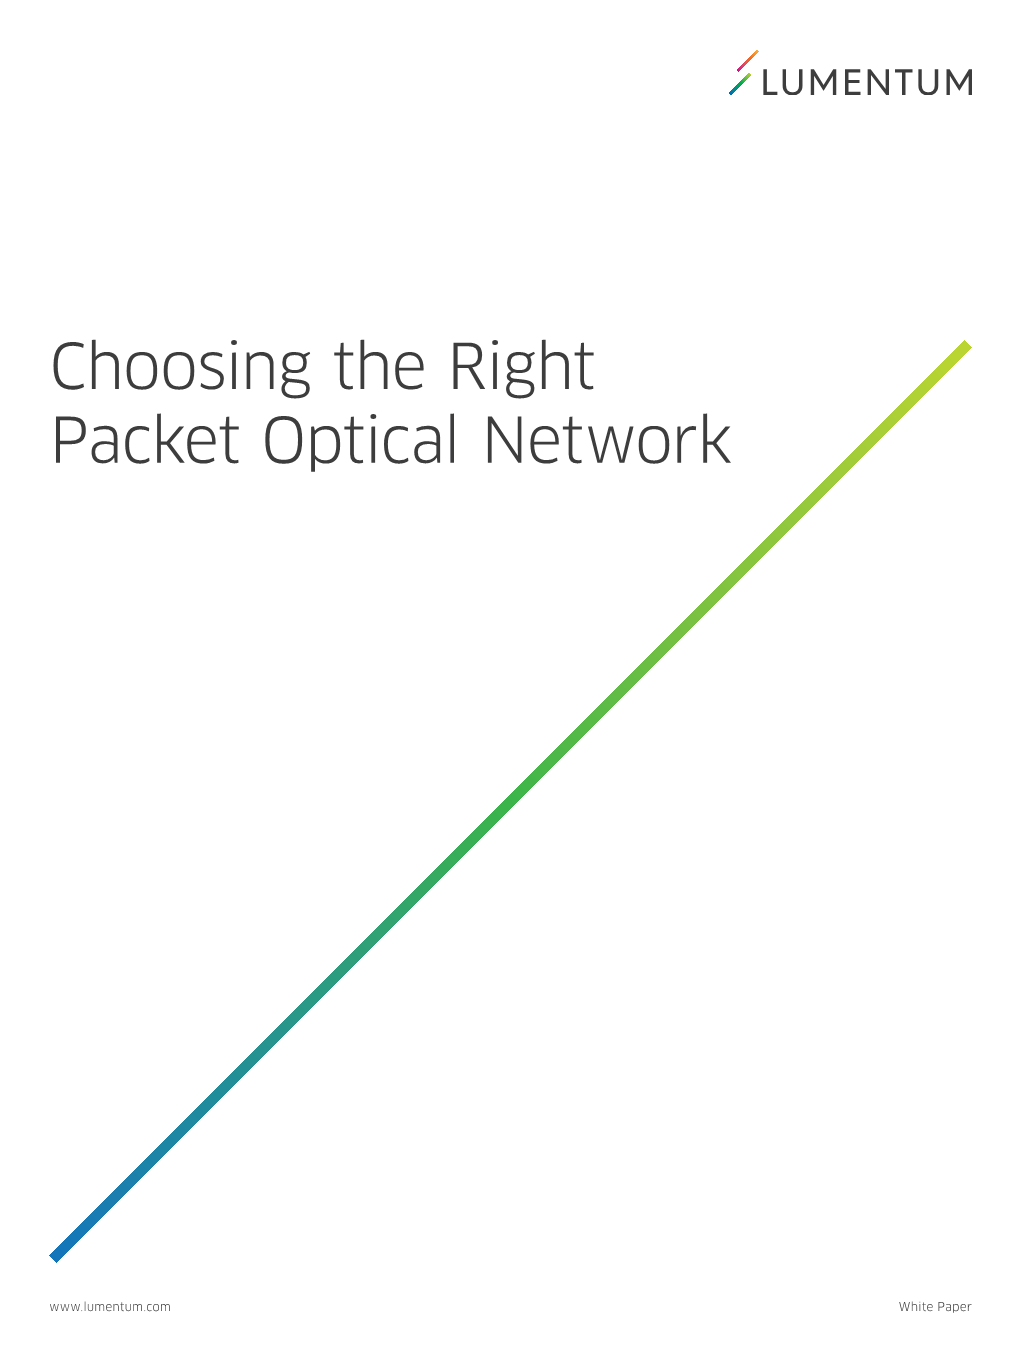 Choosing the Right Packet Optical Network